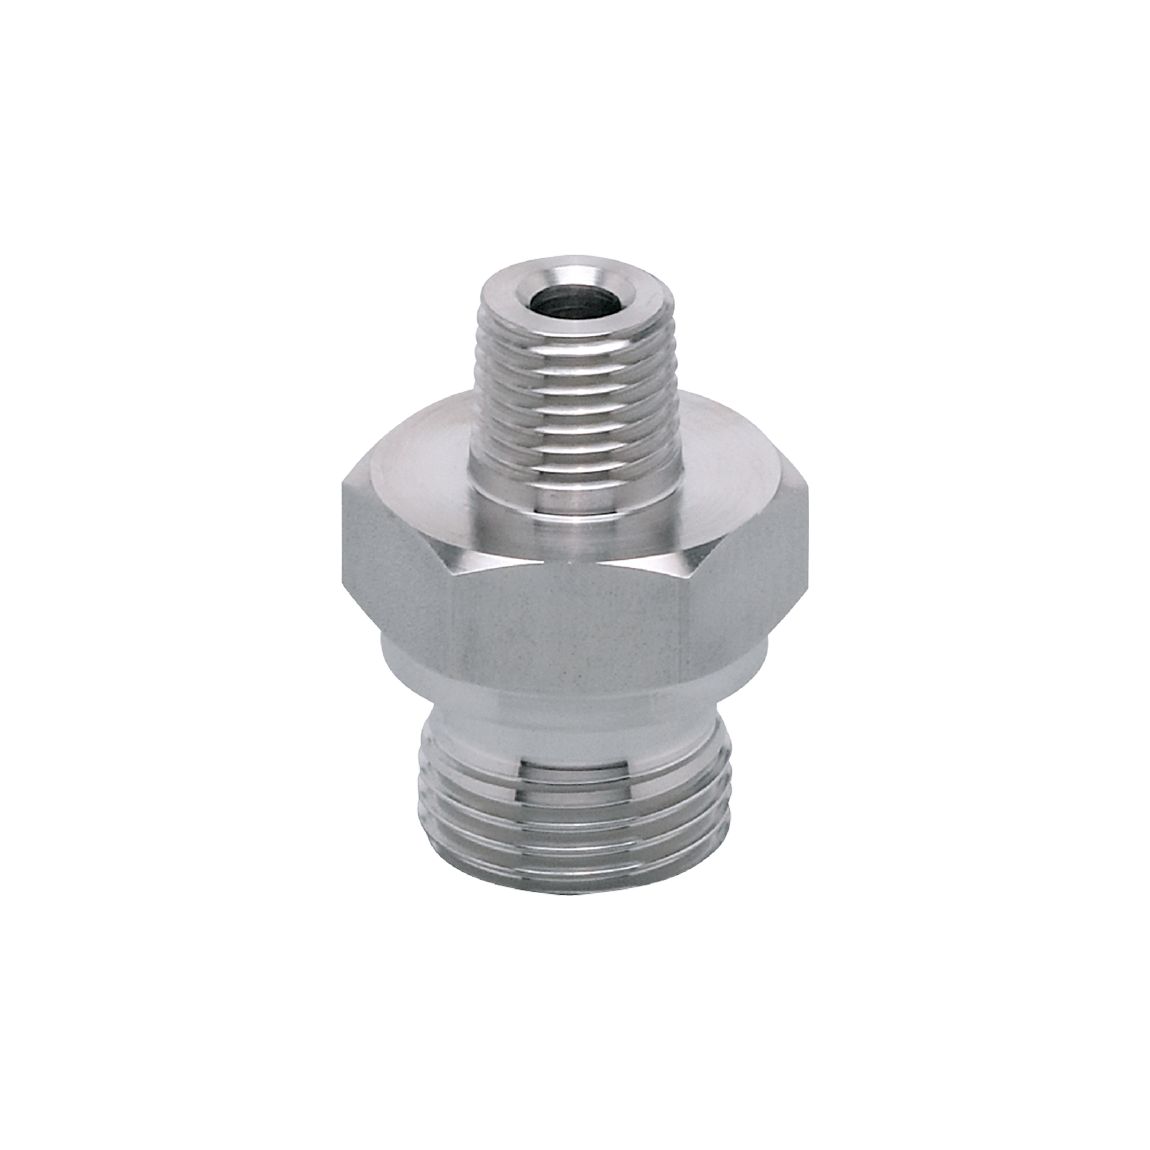 E30059 - Screw-in adapter for process sensors - ifm